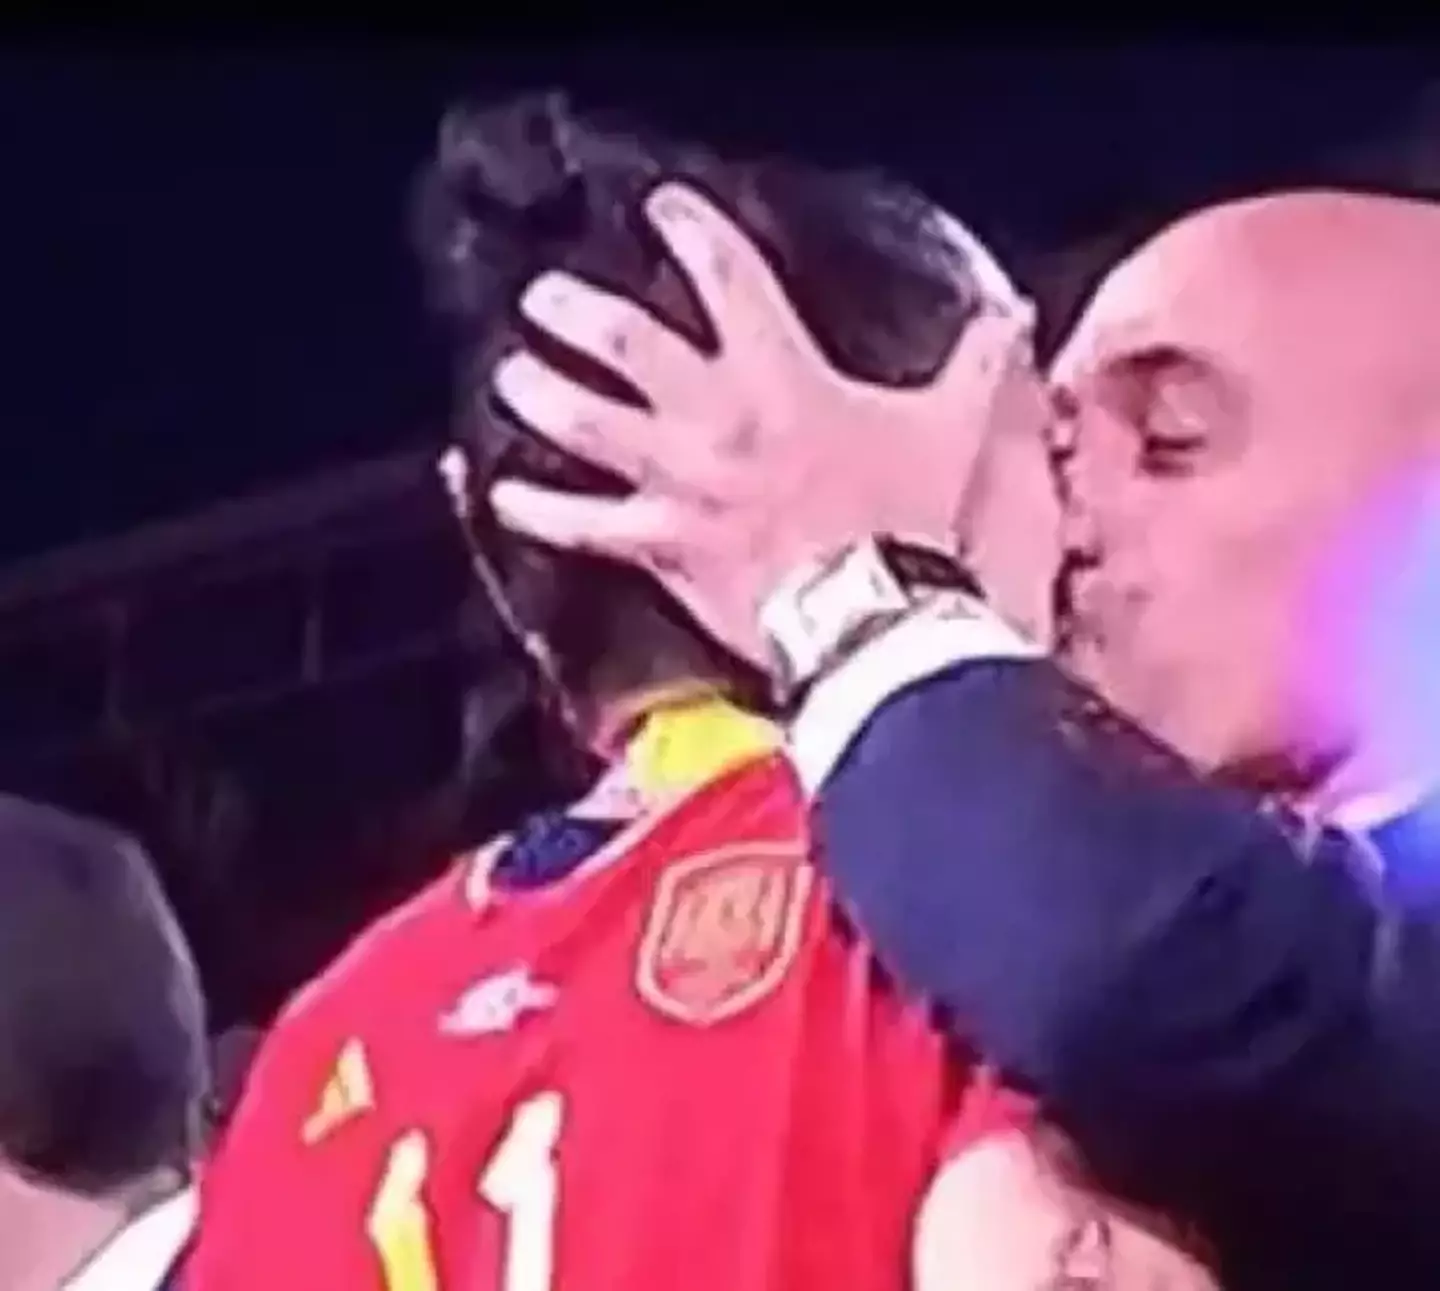 Rubiales kissed Hermoso after Spain defeated England.